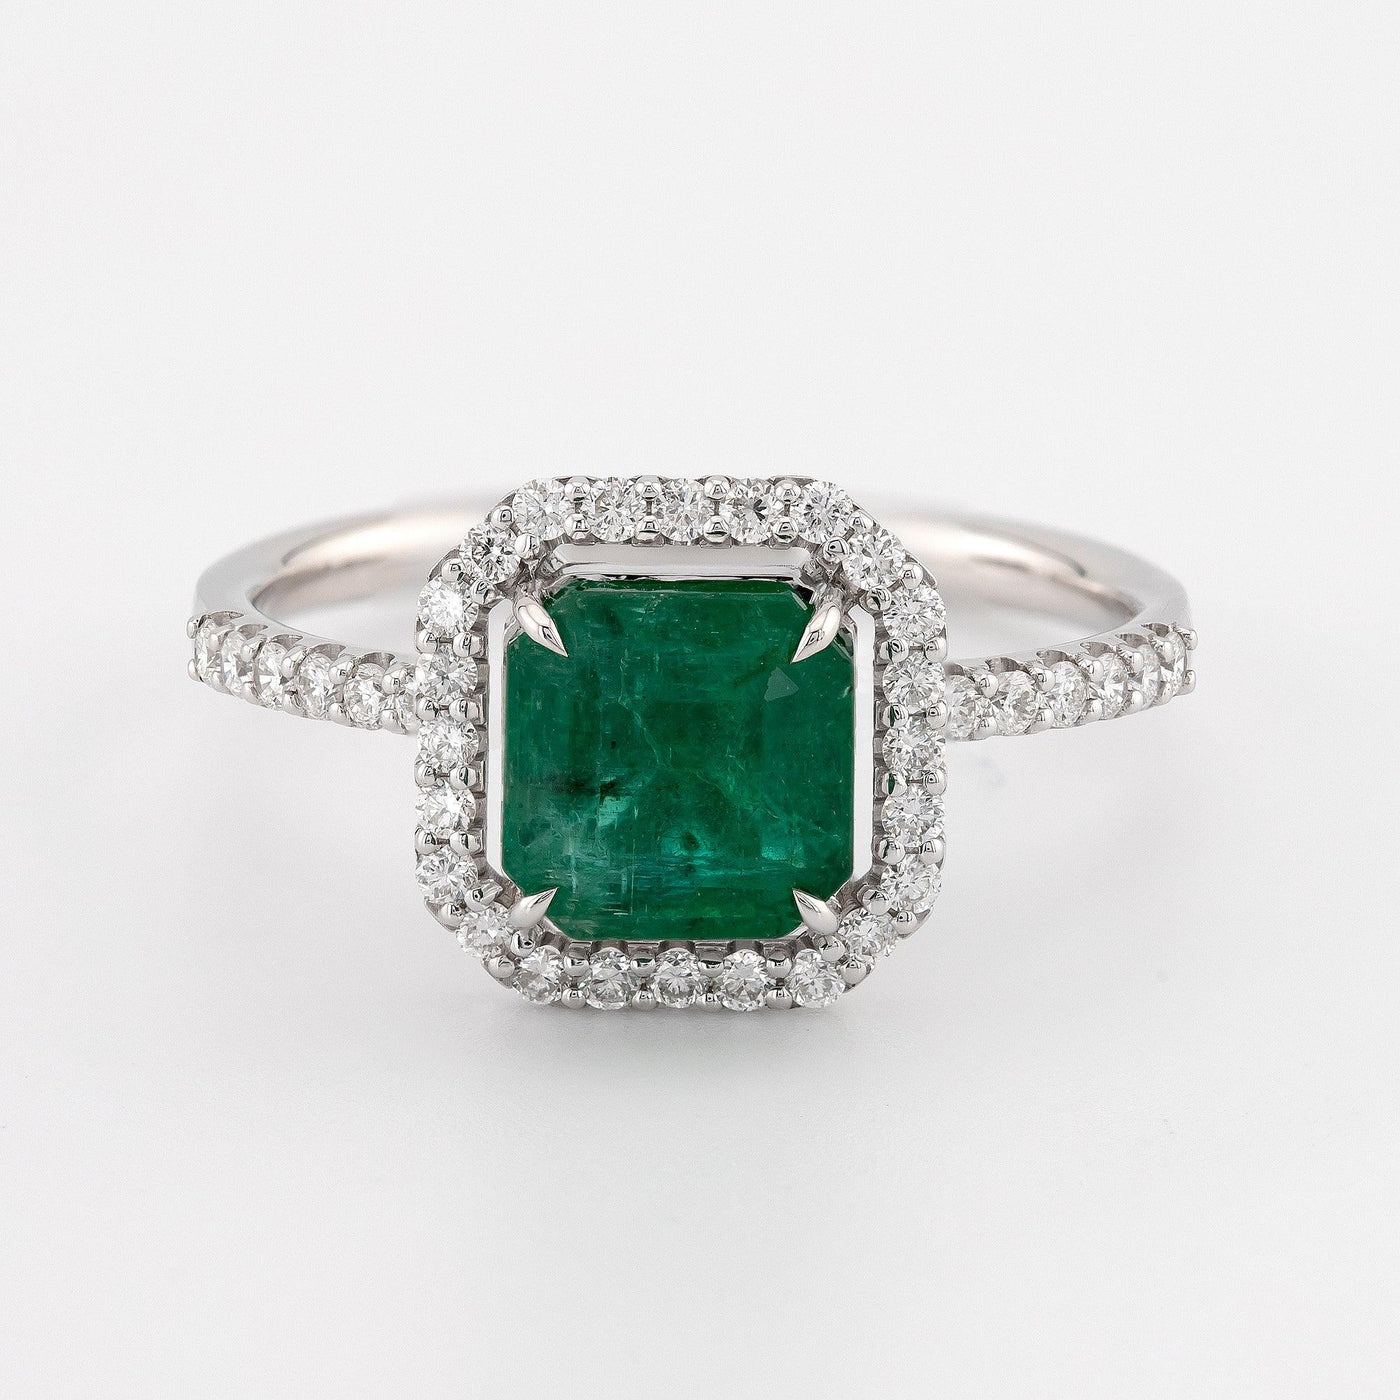 Stunning asscher cut green emerald color diamond with straight shank, eagle claw prongs, halo setting engagement ring - Rubysta